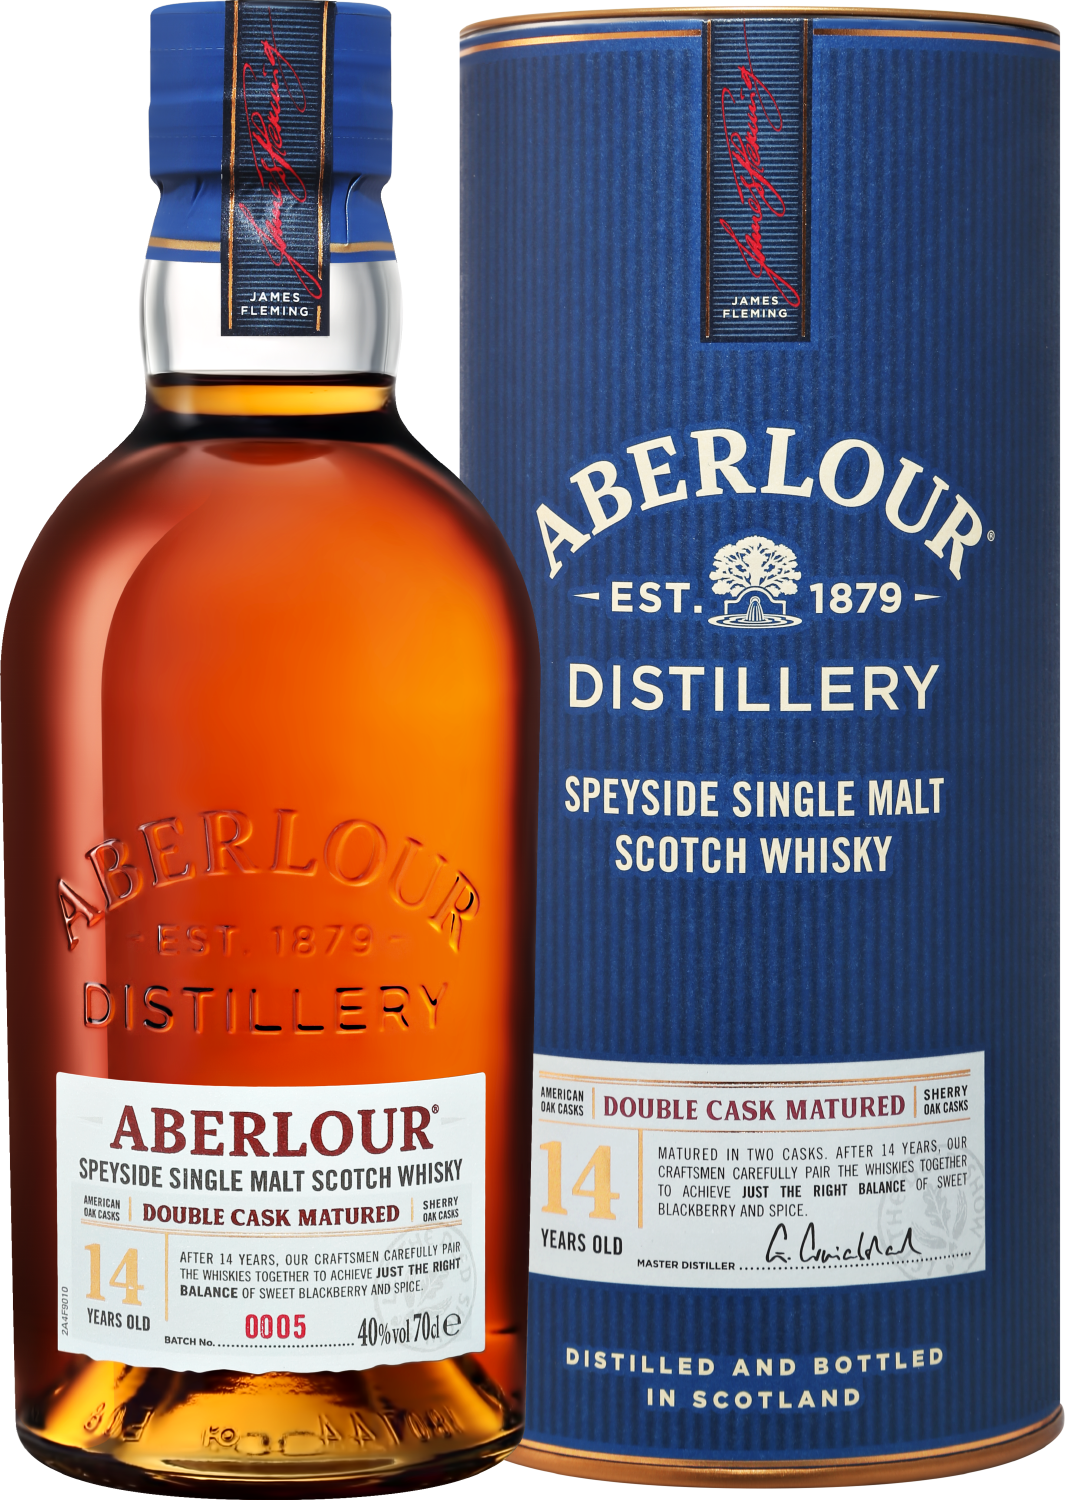 Aberlour Double Cask Matured Speyside Single Malt Scotch Whisky 14 y.o. (gift box) the glenrothes bourbon cask reserve speyside single malt scotch whisky gift box